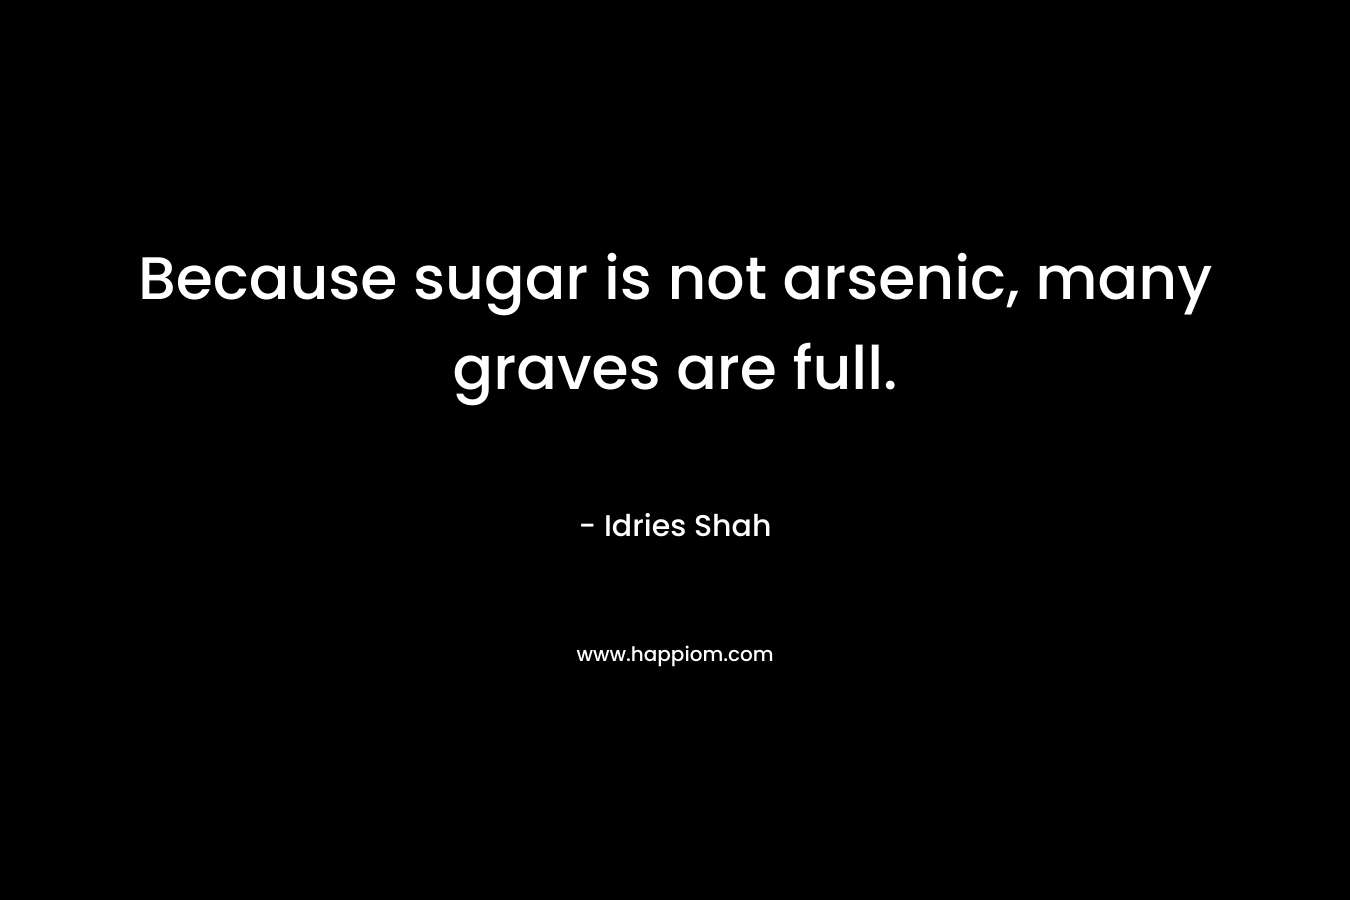 Because sugar is not arsenic, many graves are full. – Idries Shah